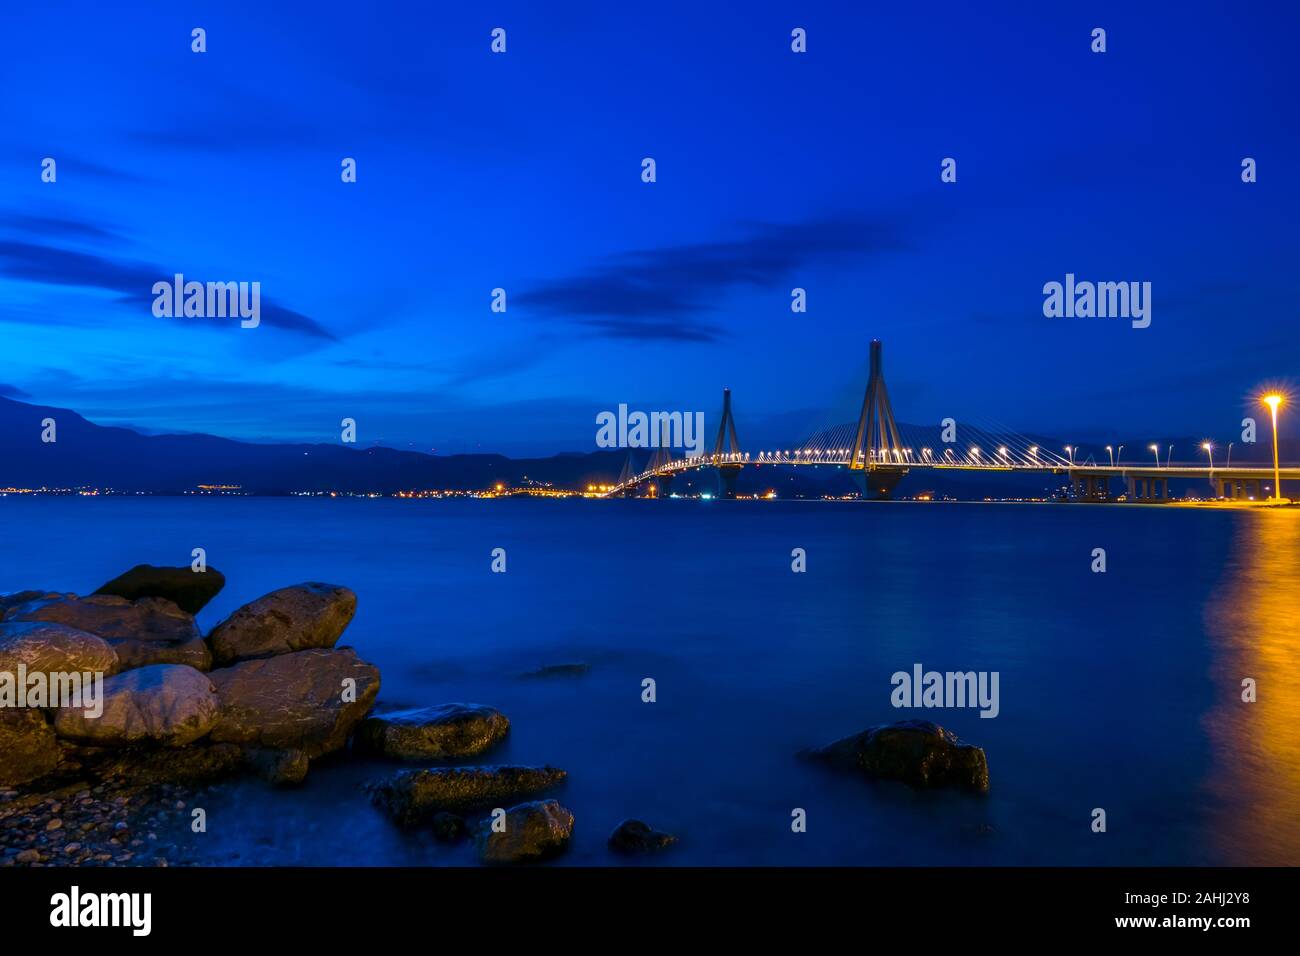 Greek cable-stayed bridge over the Gulf of Corinth. Rion-Antirion. Night sky over the mountain shore Stock Photo